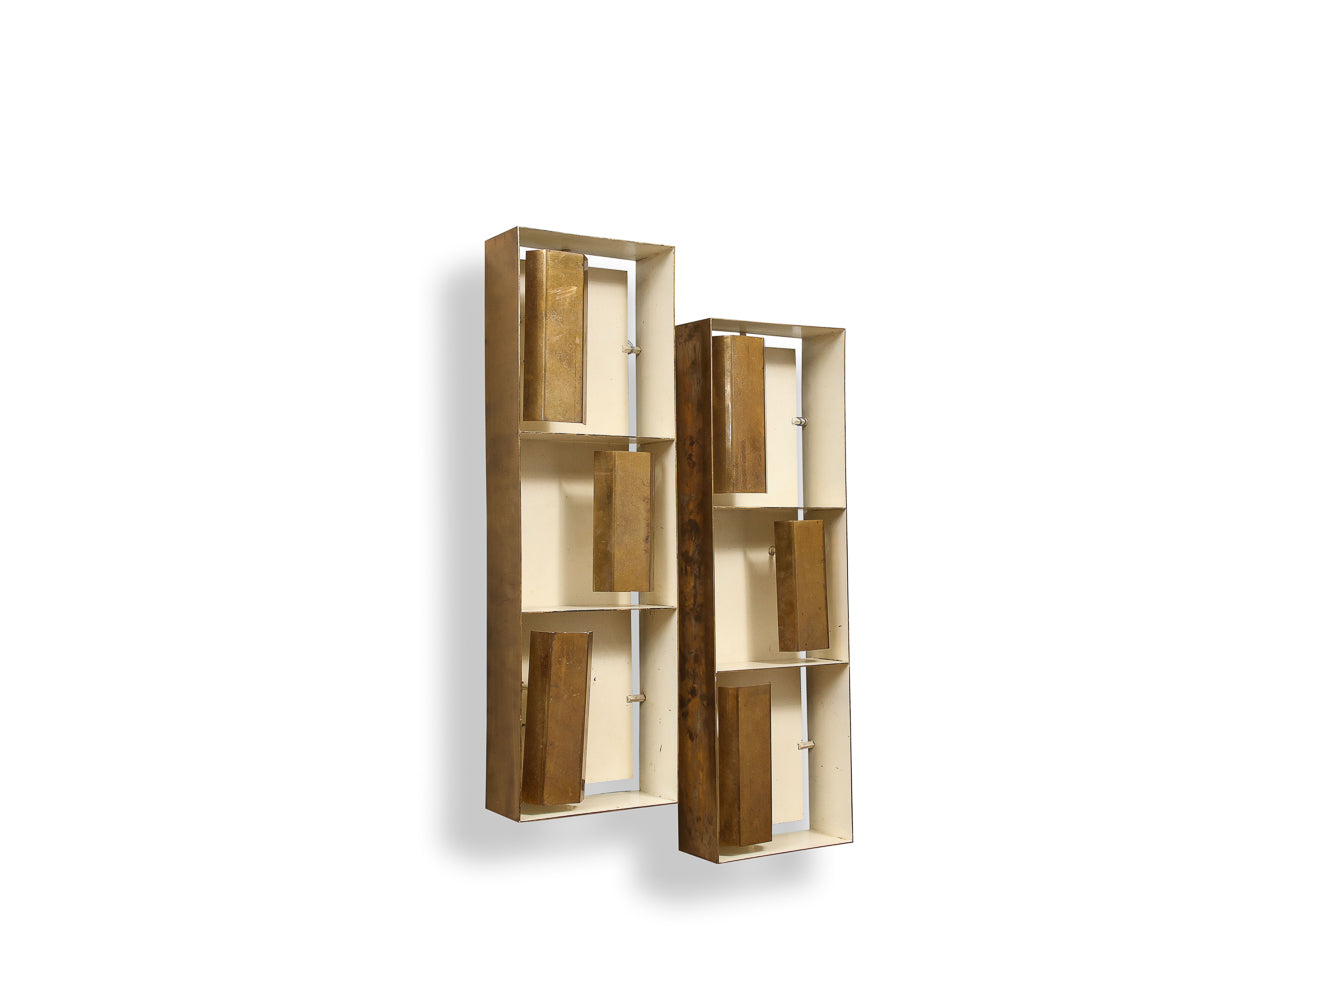 Finestra Wall Lights by Gio Ponti for Arredoluce